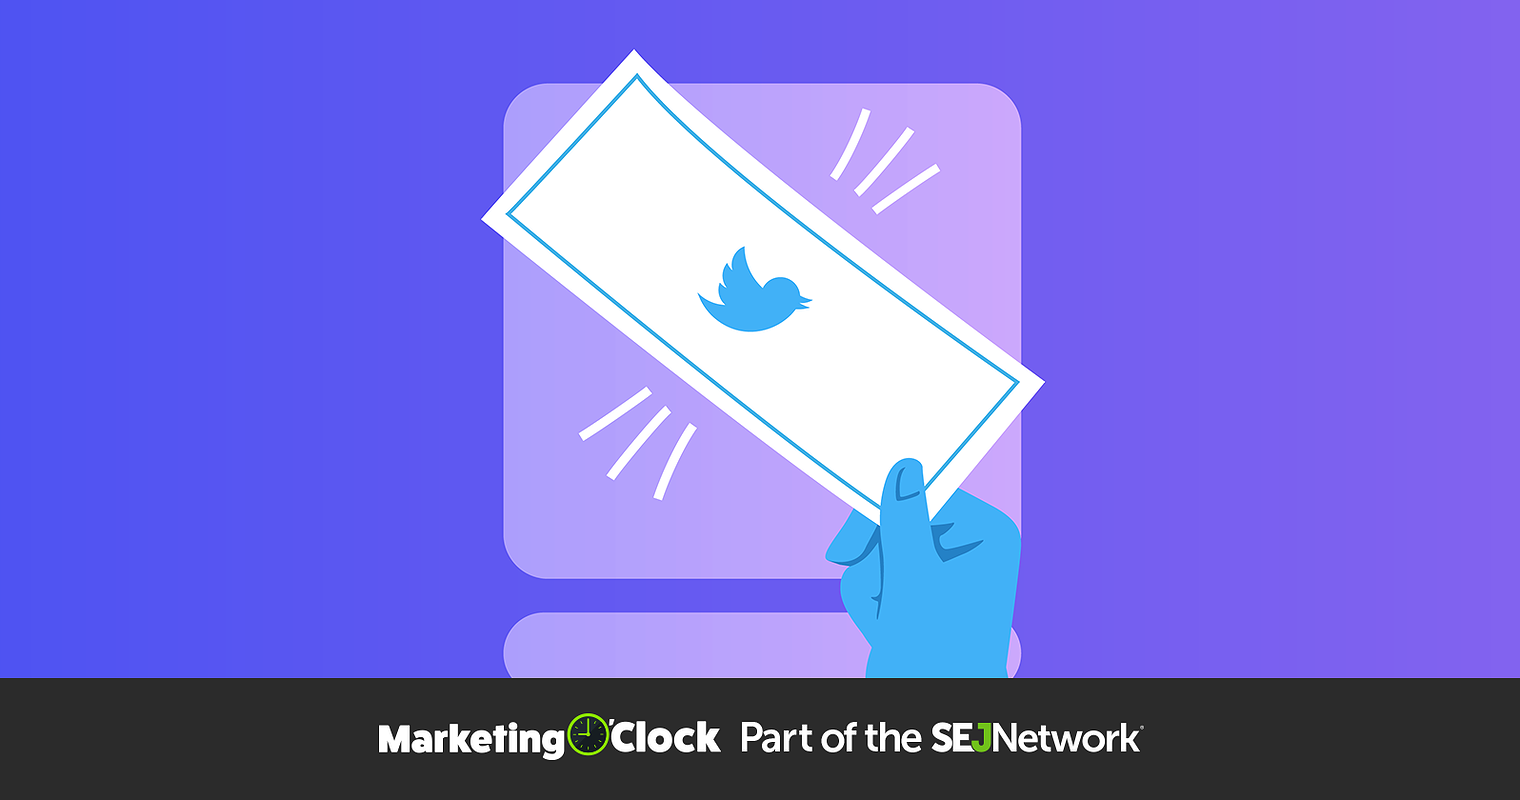 Twitter Spaces Hosts Can Charge Admission & More Digital Marketing News